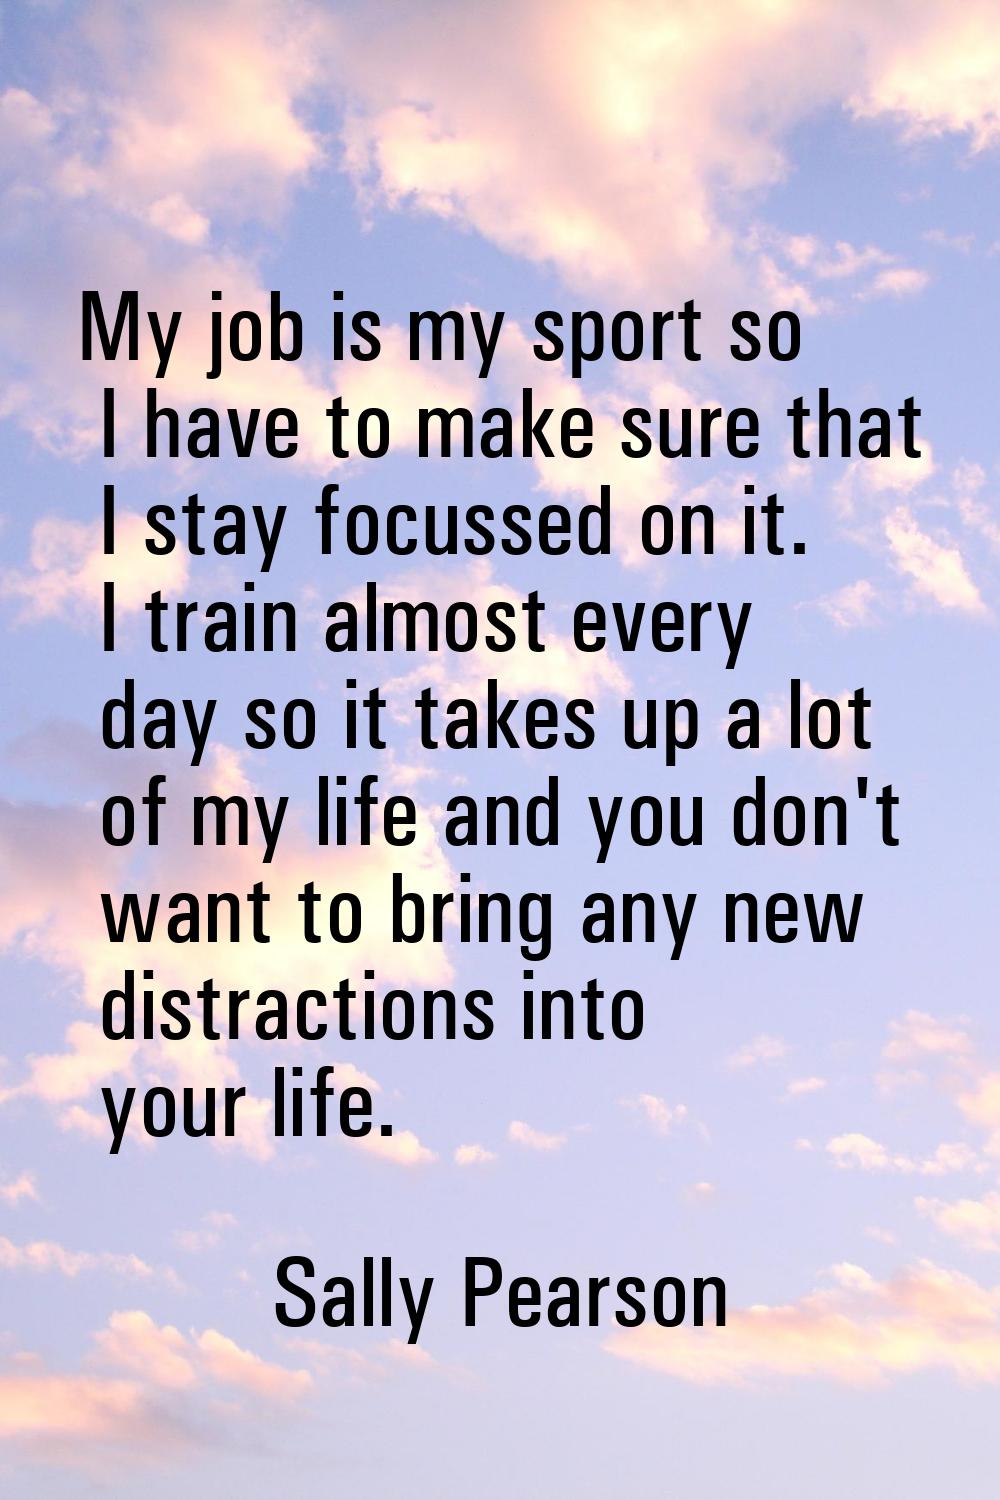 My job is my sport so I have to make sure that I stay focussed on it. I train almost every day so i